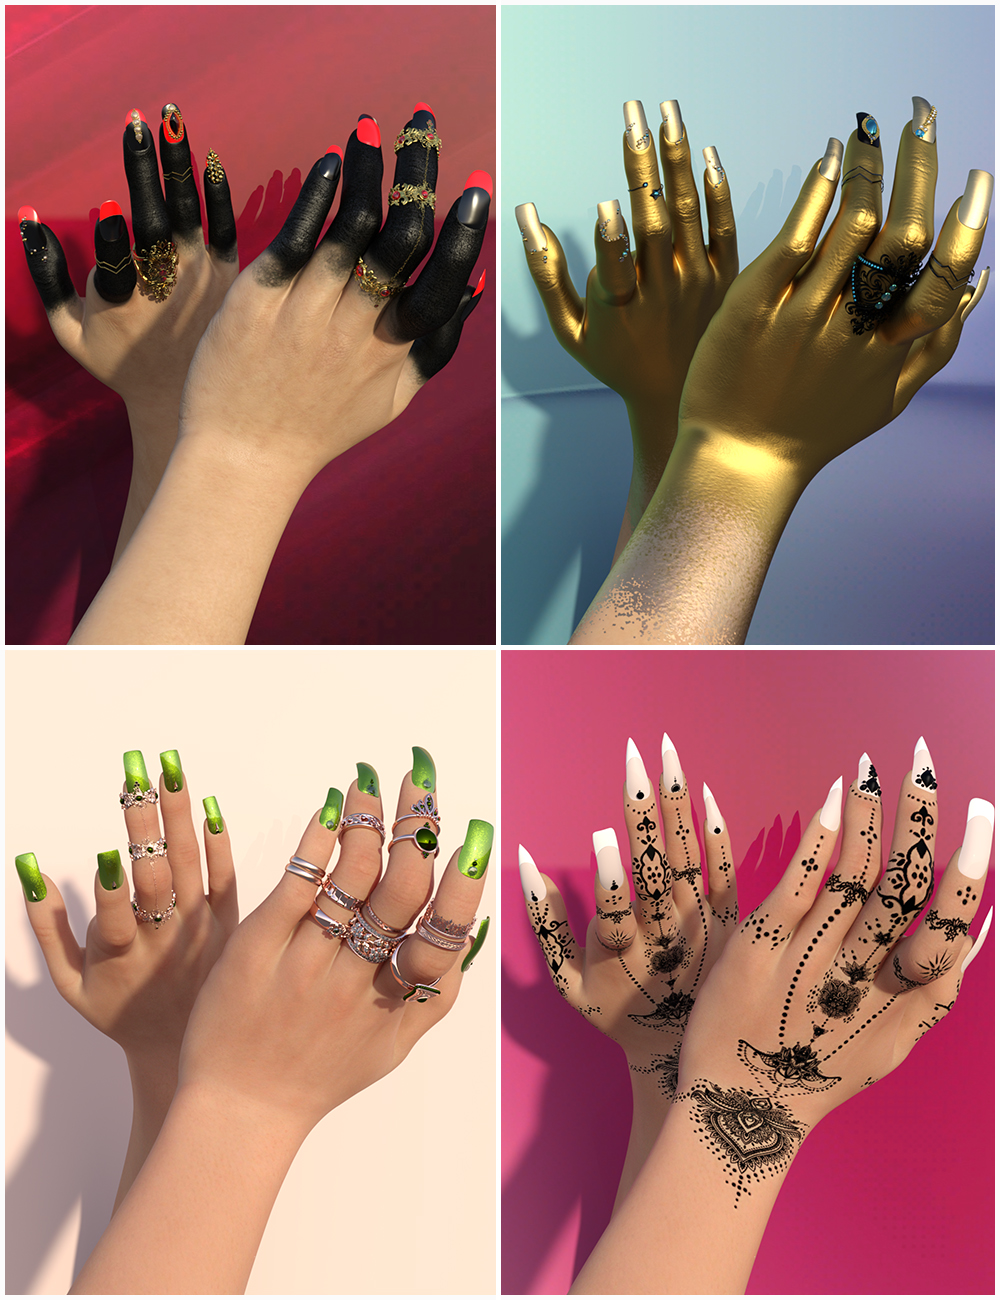 Hand Salon - Fake Nails and Jewelry by: 3DStyle, 3D Models by Daz 3D